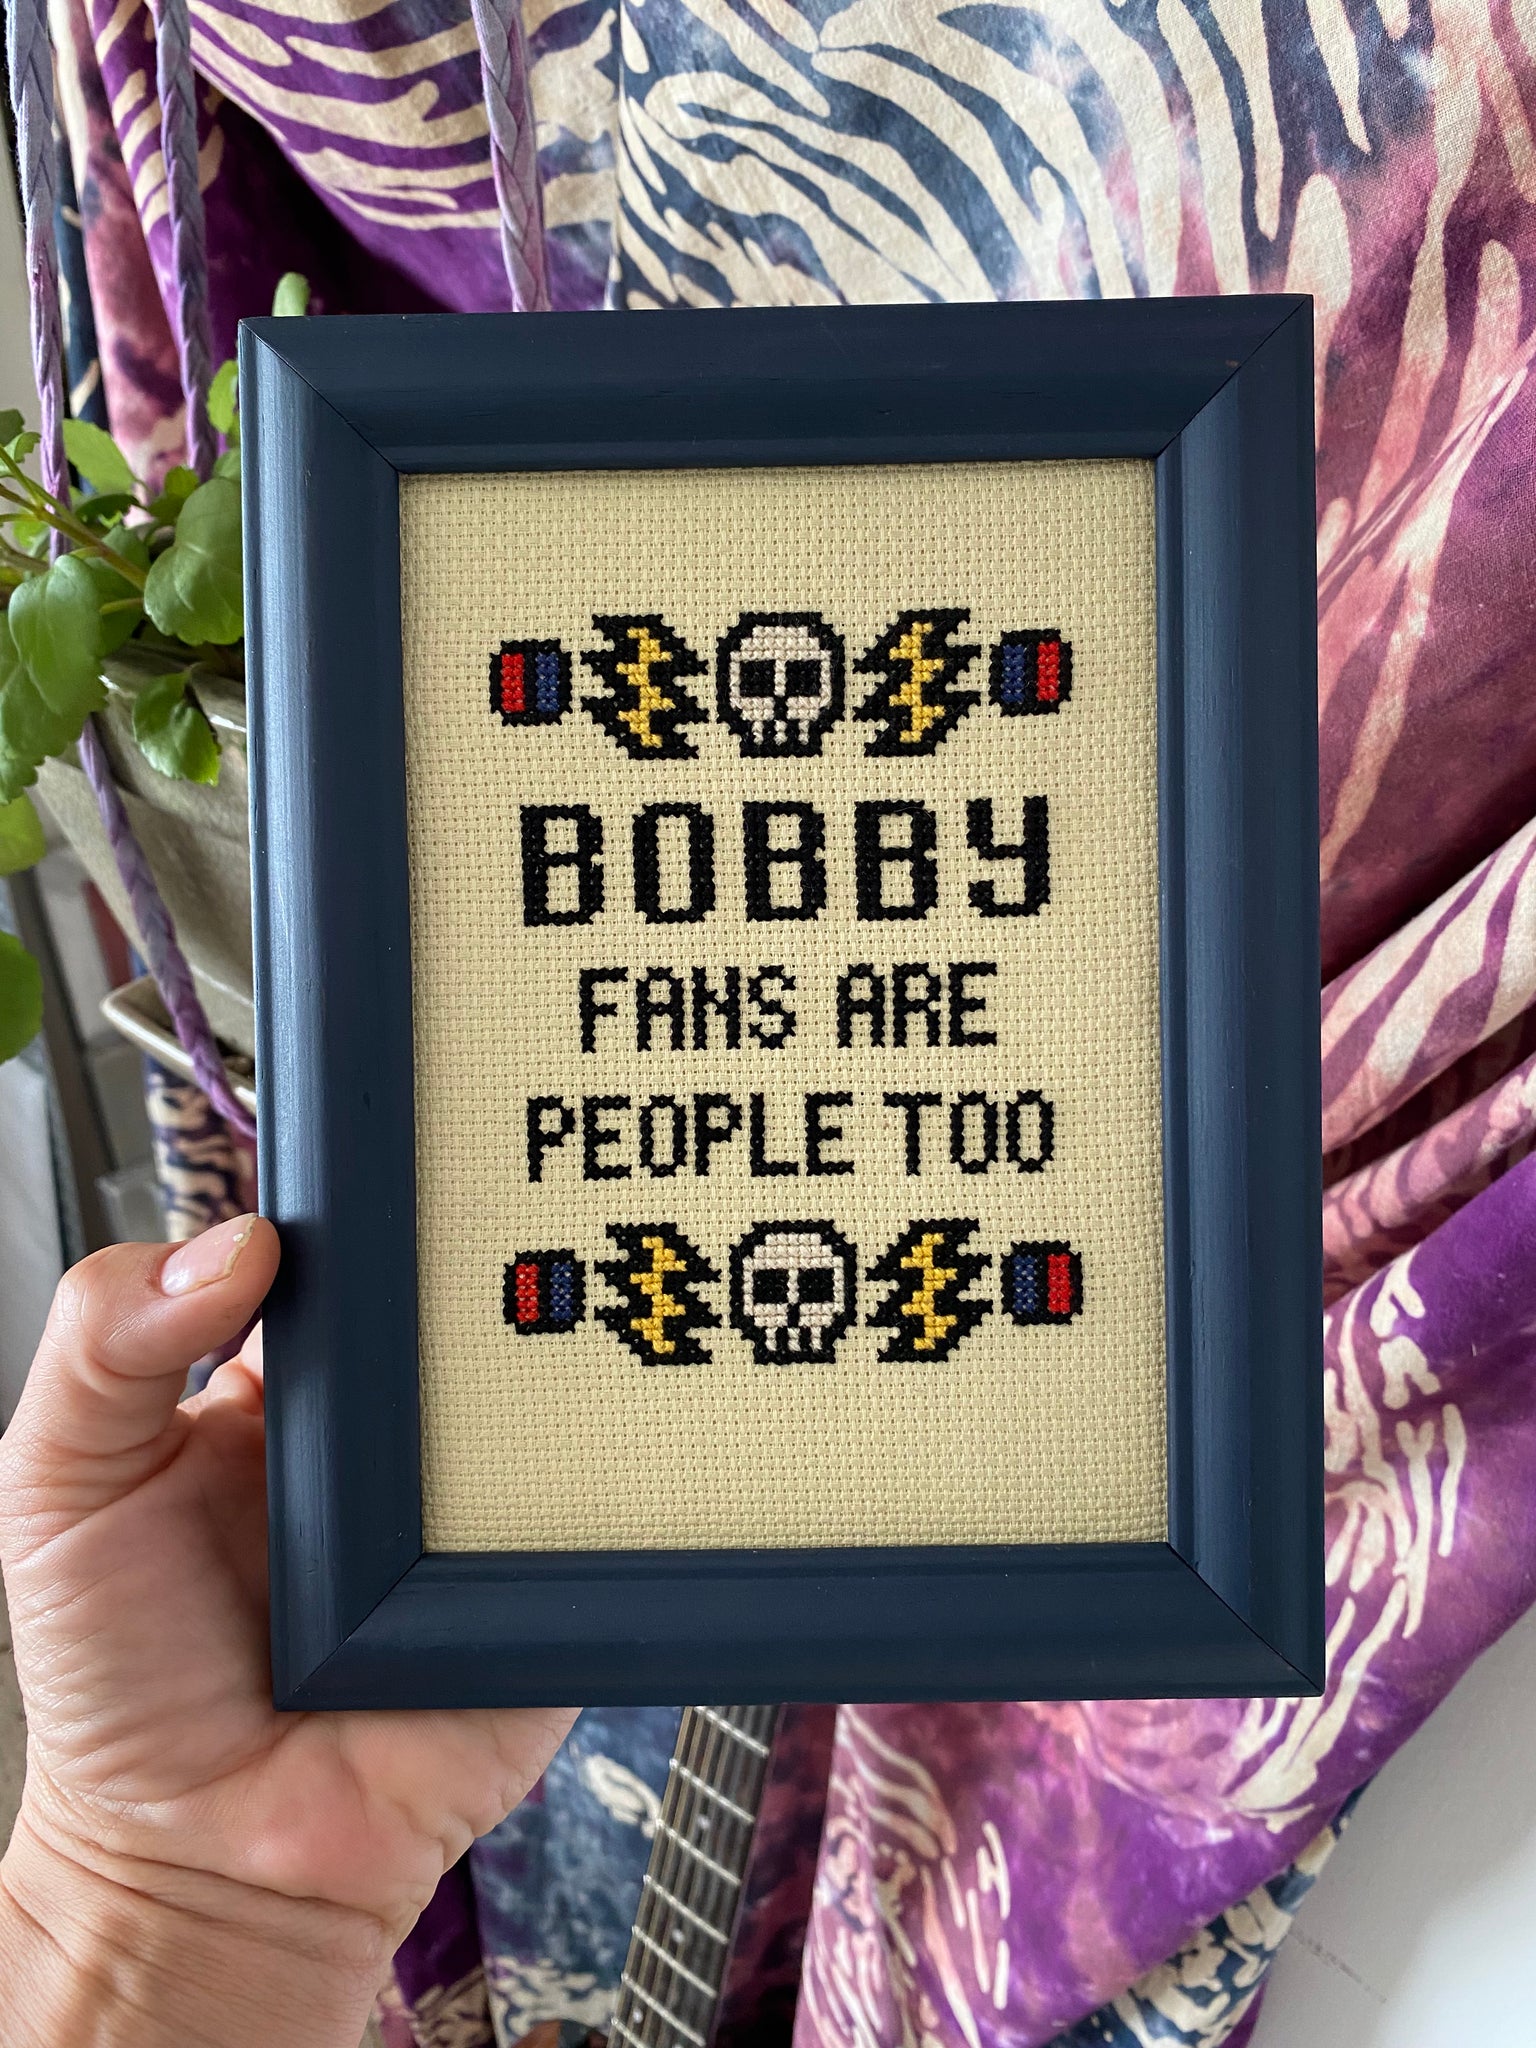 Bobby Fans Are People Too Original Finished Framed Cross Stitch